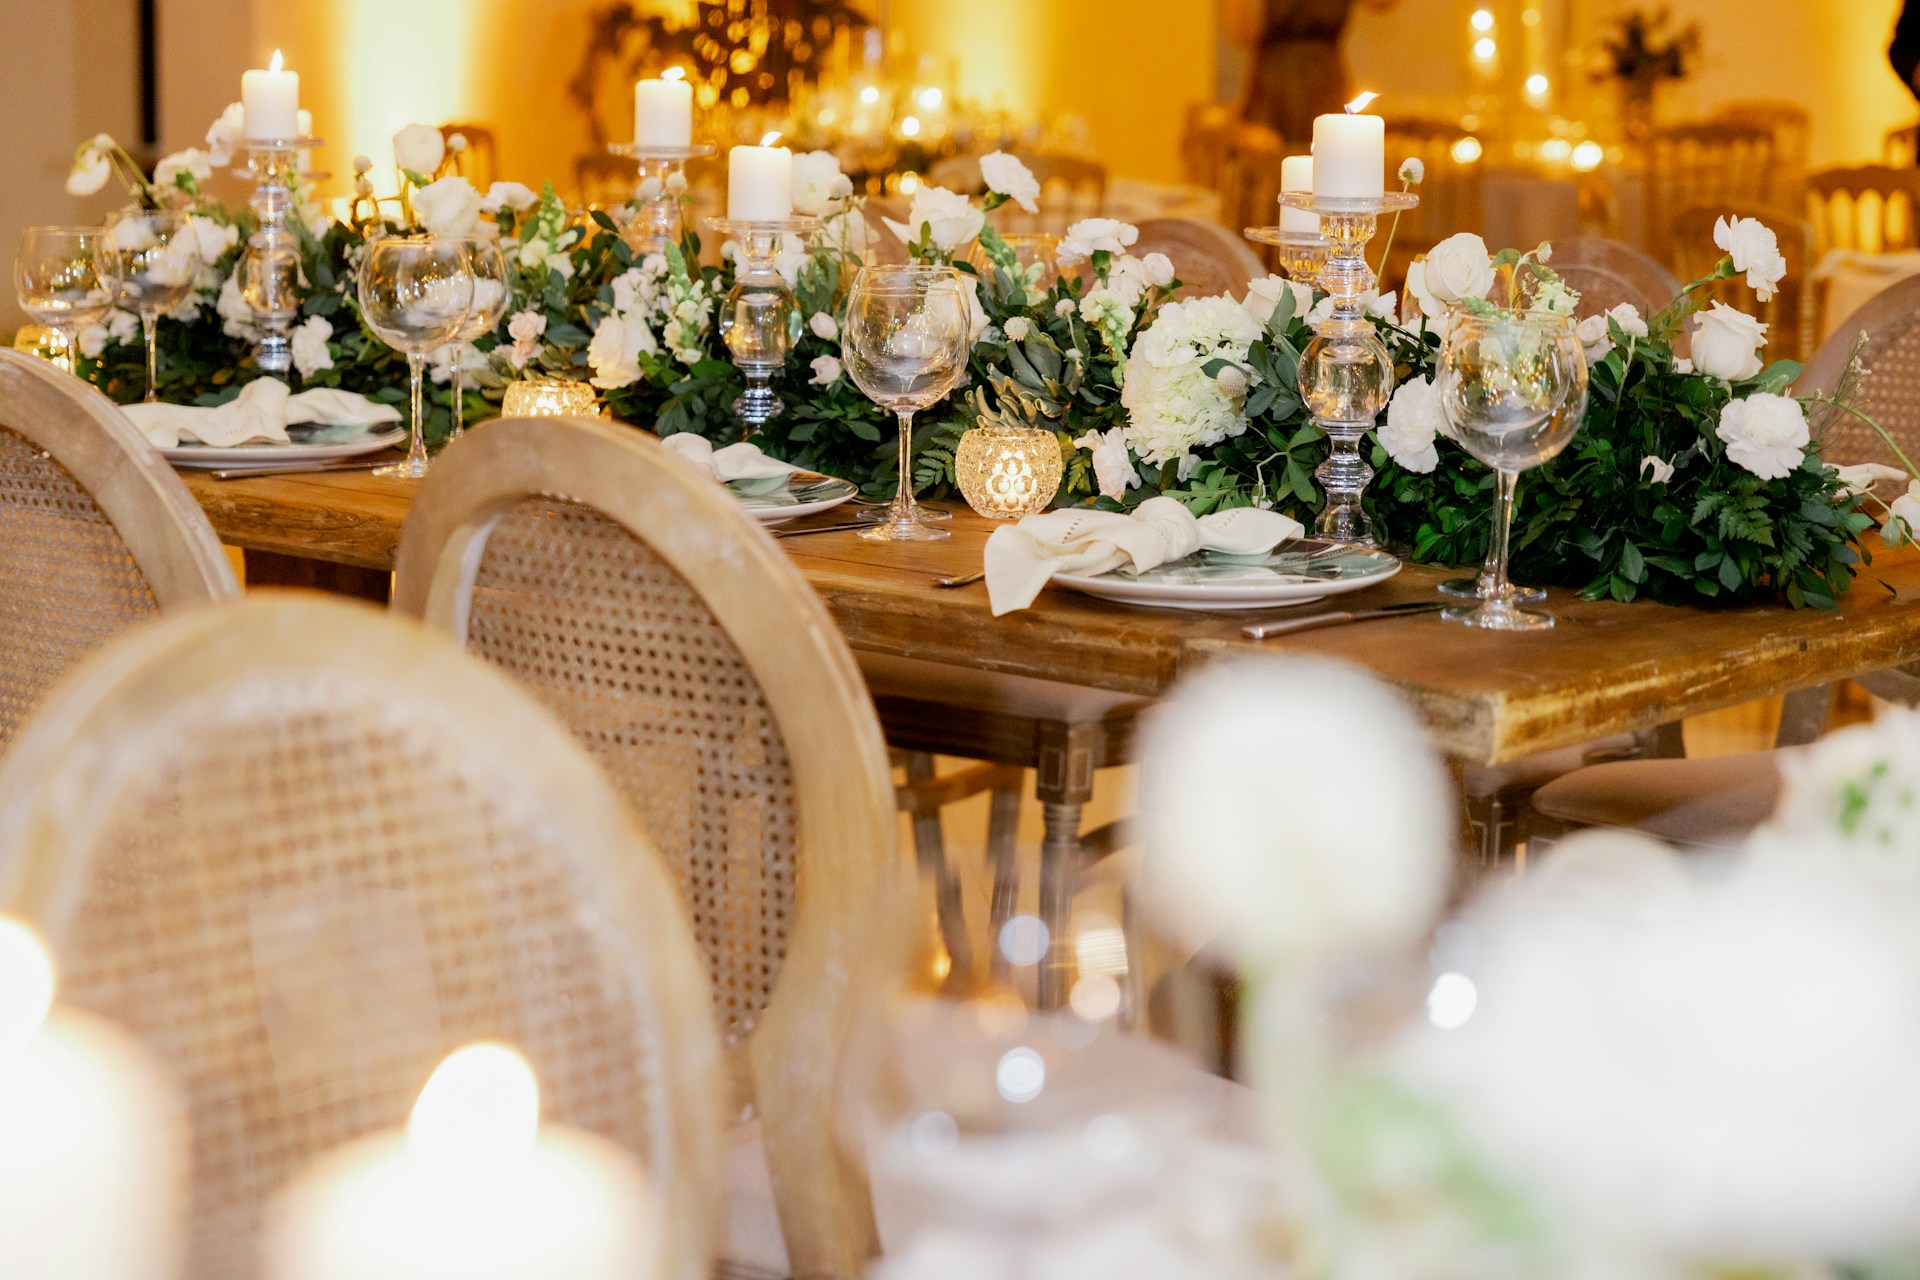 a table set for a formal dinner with candles and flowers